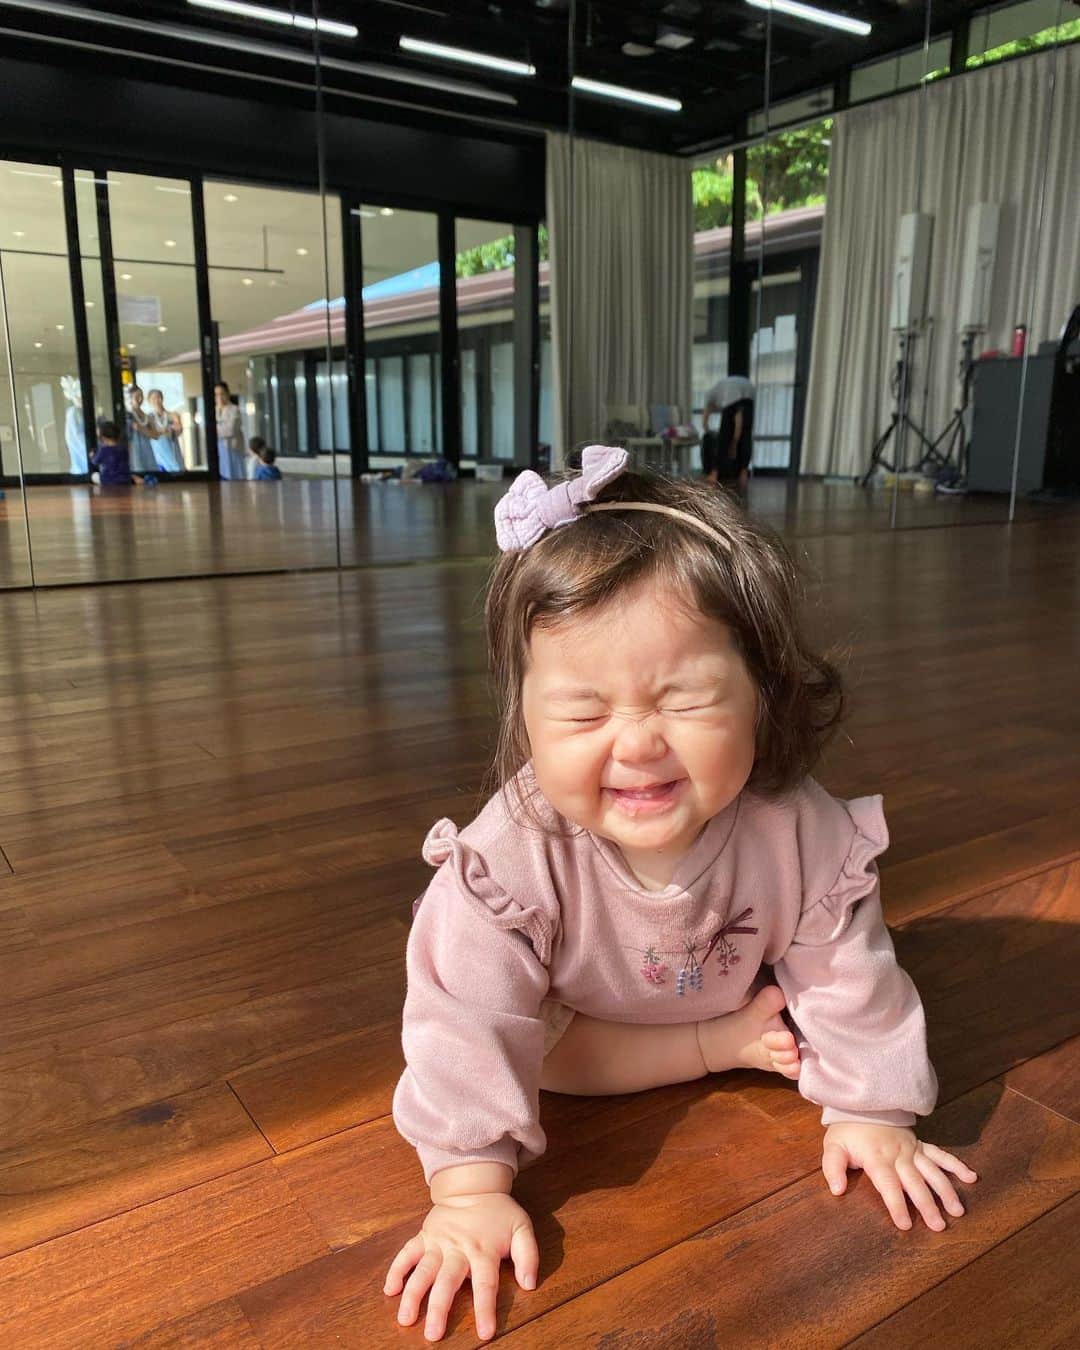 ノウィキ茉莉さんのインスタグラム写真 - (ノウィキ茉莉Instagram)「1 year old 1️⃣💕👶🏼 (January 3rd)  Happy Birthday my sweet baby! Can’t believe it’s already been a year since you have come into our life. We are so grateful for you and I am so glad to be your mommy! Thank you for always bringing us so much joy!   Here are some updates of our baby’s progress: 1. She learned how to wave 👋  2. She can drink from a straw 🥤 3. She can stand on her own without support 4. She learned how to baby sign “more” 5. She imitates what we do 6. She loves to play the piano and guitar 🎹 🎸  7. She can climb up the slide and slide down on her own 🛝  8. She can draw with a pen and paper (scribble mostly) 📝  9. She can walk with her baby walker toy 10. She can eat her food with her spoon/fork (still working on it.. mostly uses her hands) 🥄 11. She loves going outside   1歳 1️⃣💕👶🏼 (1月3日)  ハッピーバースデー🎂🎈 莉嘉が私たちのもとに生まれてきてくれて もう1年経つなんて信じられない〜🥲 本当に幸せ🥹💕 私を母にさせてくれて本当にありがとう〜 生まれてきてくれてありがとう〜☺️  リカが1歳になってこれまでの成長について振り返りたいと思います:  1. 手を振るようになった👋  2. ストローで飲み物を飲めるようになった🥤 3. 何も掴まずに立ち上がれるようになった 4. ベビーサインで「もっと」ができるようになった 5. 私たちの動きの真似をするようになった 6. ピアノとギターを触るのが好き🎹 🎸  7. 滑り台を登ったり、滑ったりできるようになった(頭から滑ることが多い笑)🛝  8. お絵描きおもちゃで上手くペンを持ちながら描けるようになった📝  9. ウォーカーのおもちゃを押しながら歩くようになった 10. 離乳食を食べる時にスプーンやフォークを自分で持って食べたがるようになった(最終的には手で食べてるけど🤣)🥄 11. お出かけが大好き❤ (顔に風があたるのが気持ちいいみたい)  #1歳ベビー #1yearold #birthday #1歳誕生日 #お家スタジオ #1yearoldbirthday #誕生日 #ハッピーバースデー #babiesofinstagram #babies #motherhood #ベビスタグラム #赤ちゃんのいる生活 #赤ちゃんのいる暮らし  #親バカ部 #クォーター #girlmom #女の子ママ #newmom #momlife #沖縄ベビー #okinawa #沖縄子育て」2月24日 7時35分 - kristen.marii